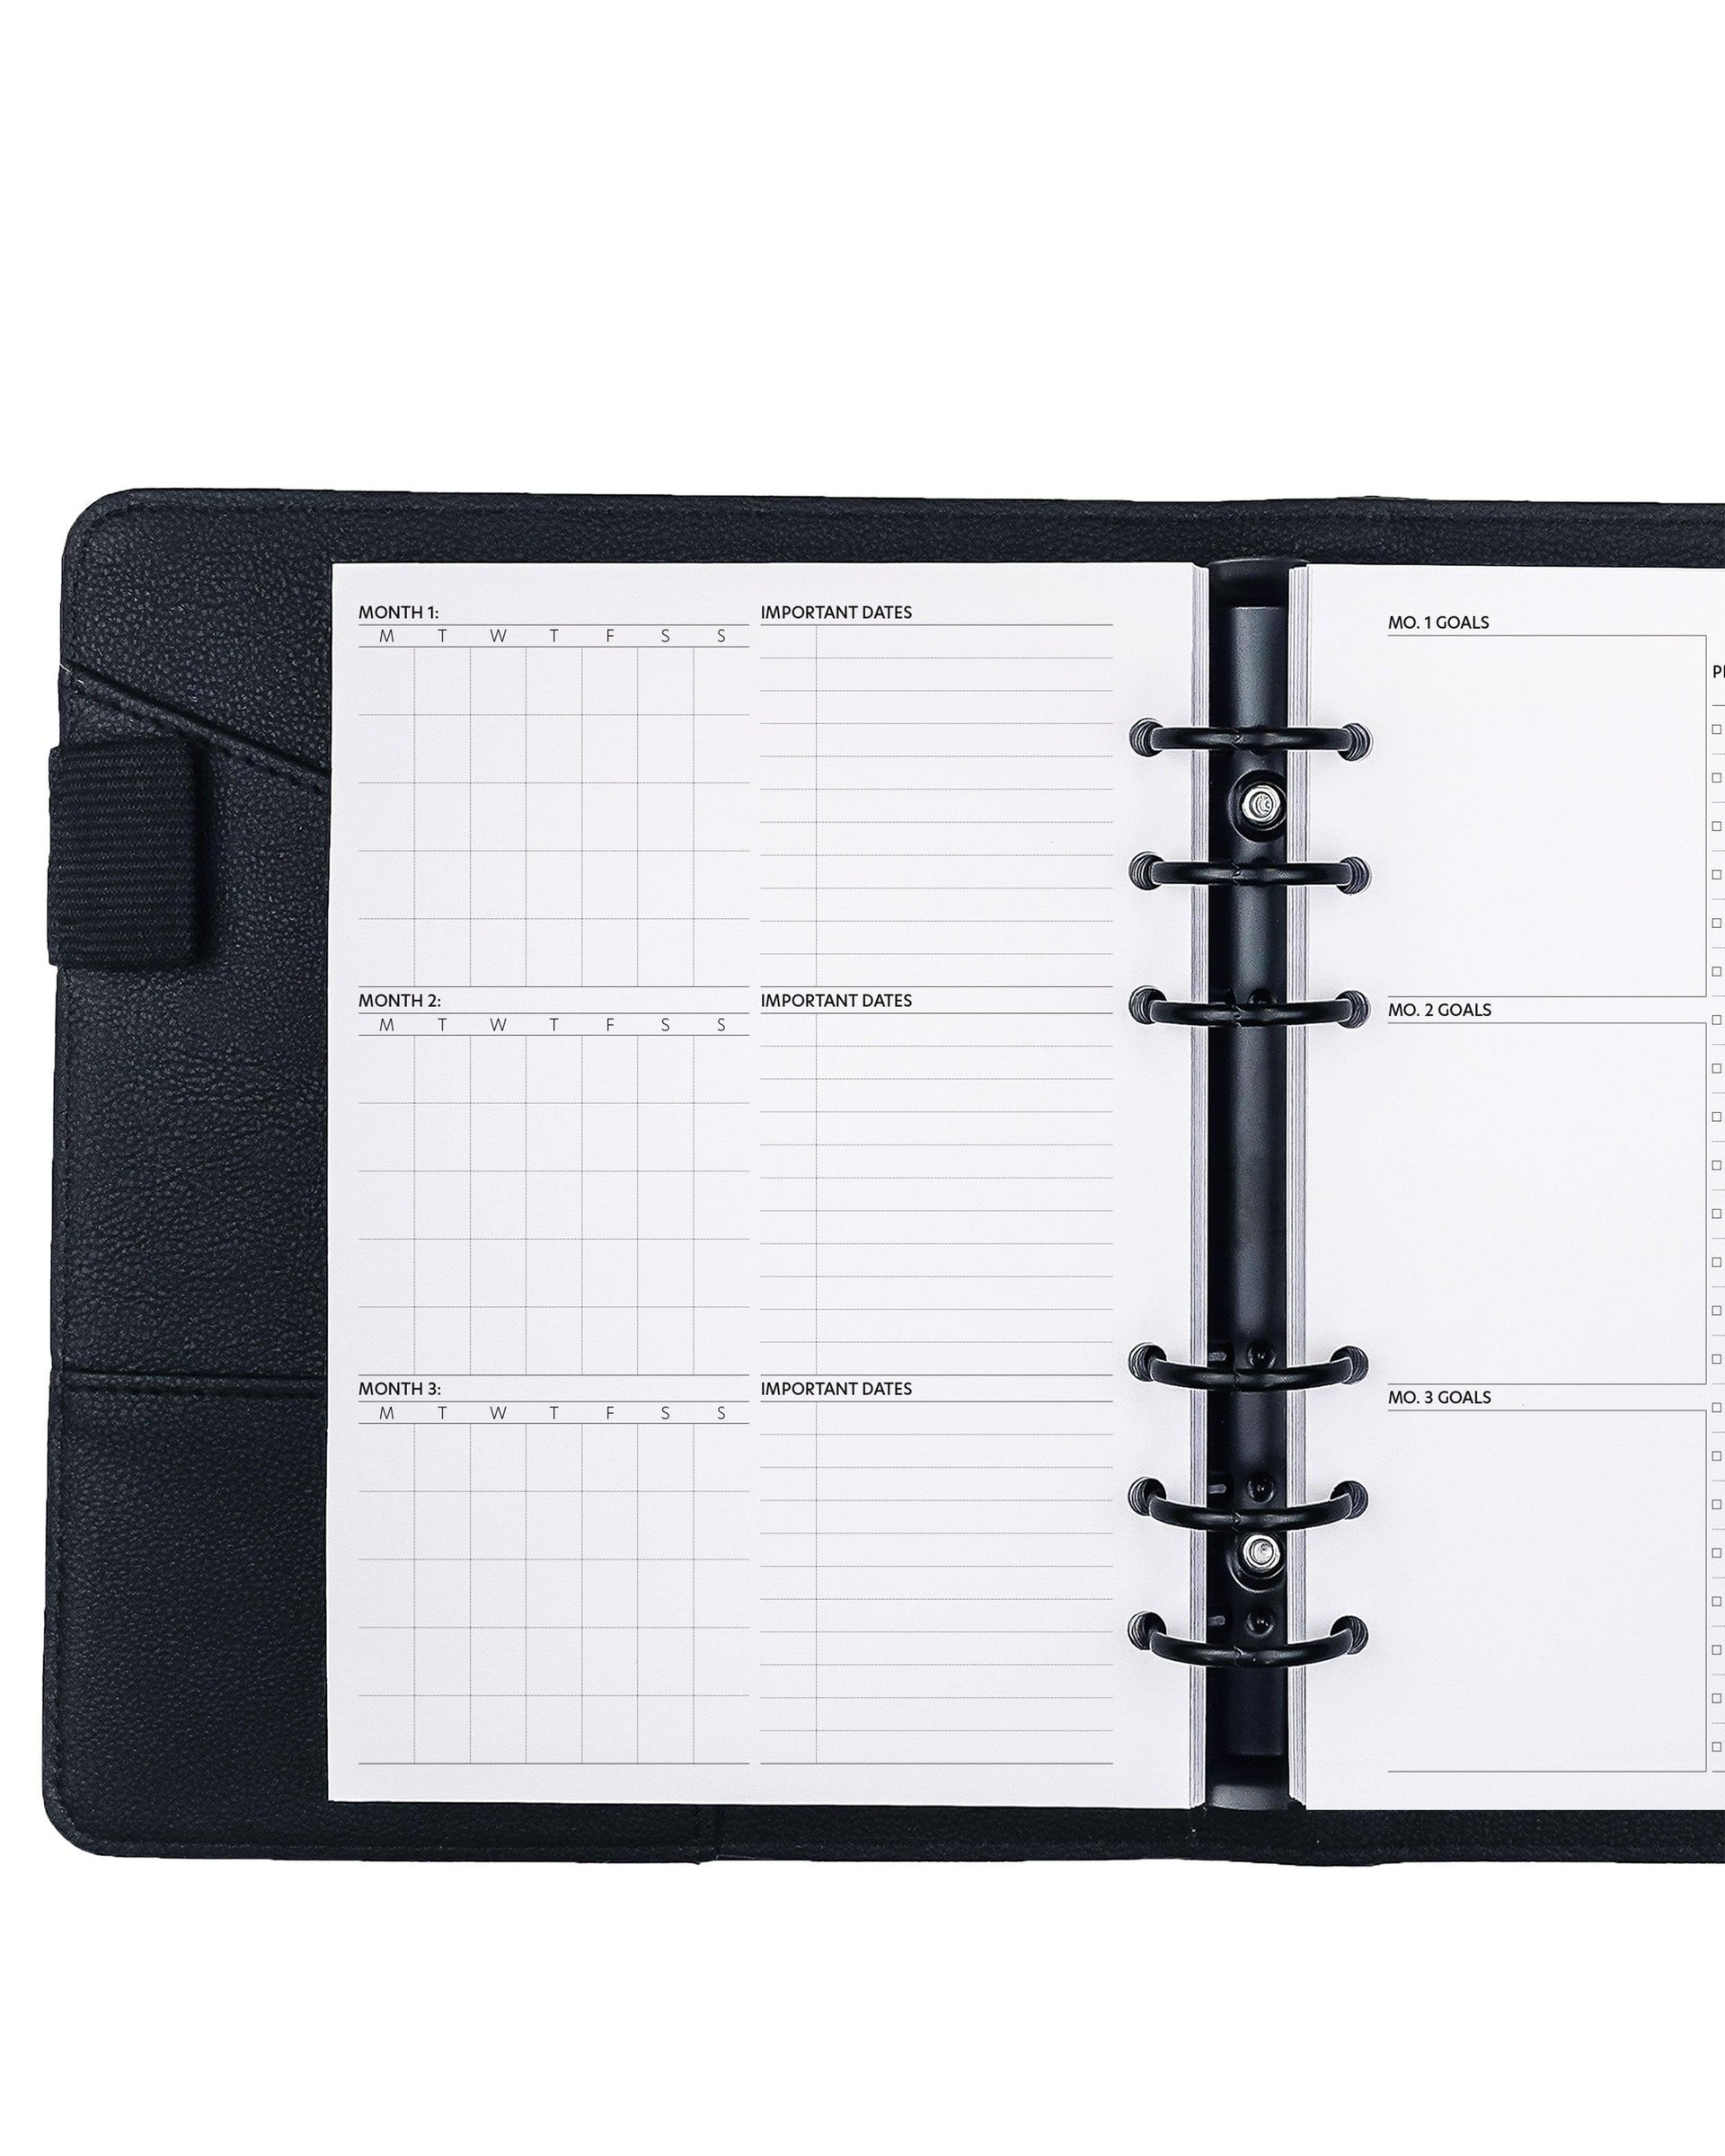 Quarterly monthly planning inserts for discbound and six ring planners and planner binding systems by Janes Agenda.